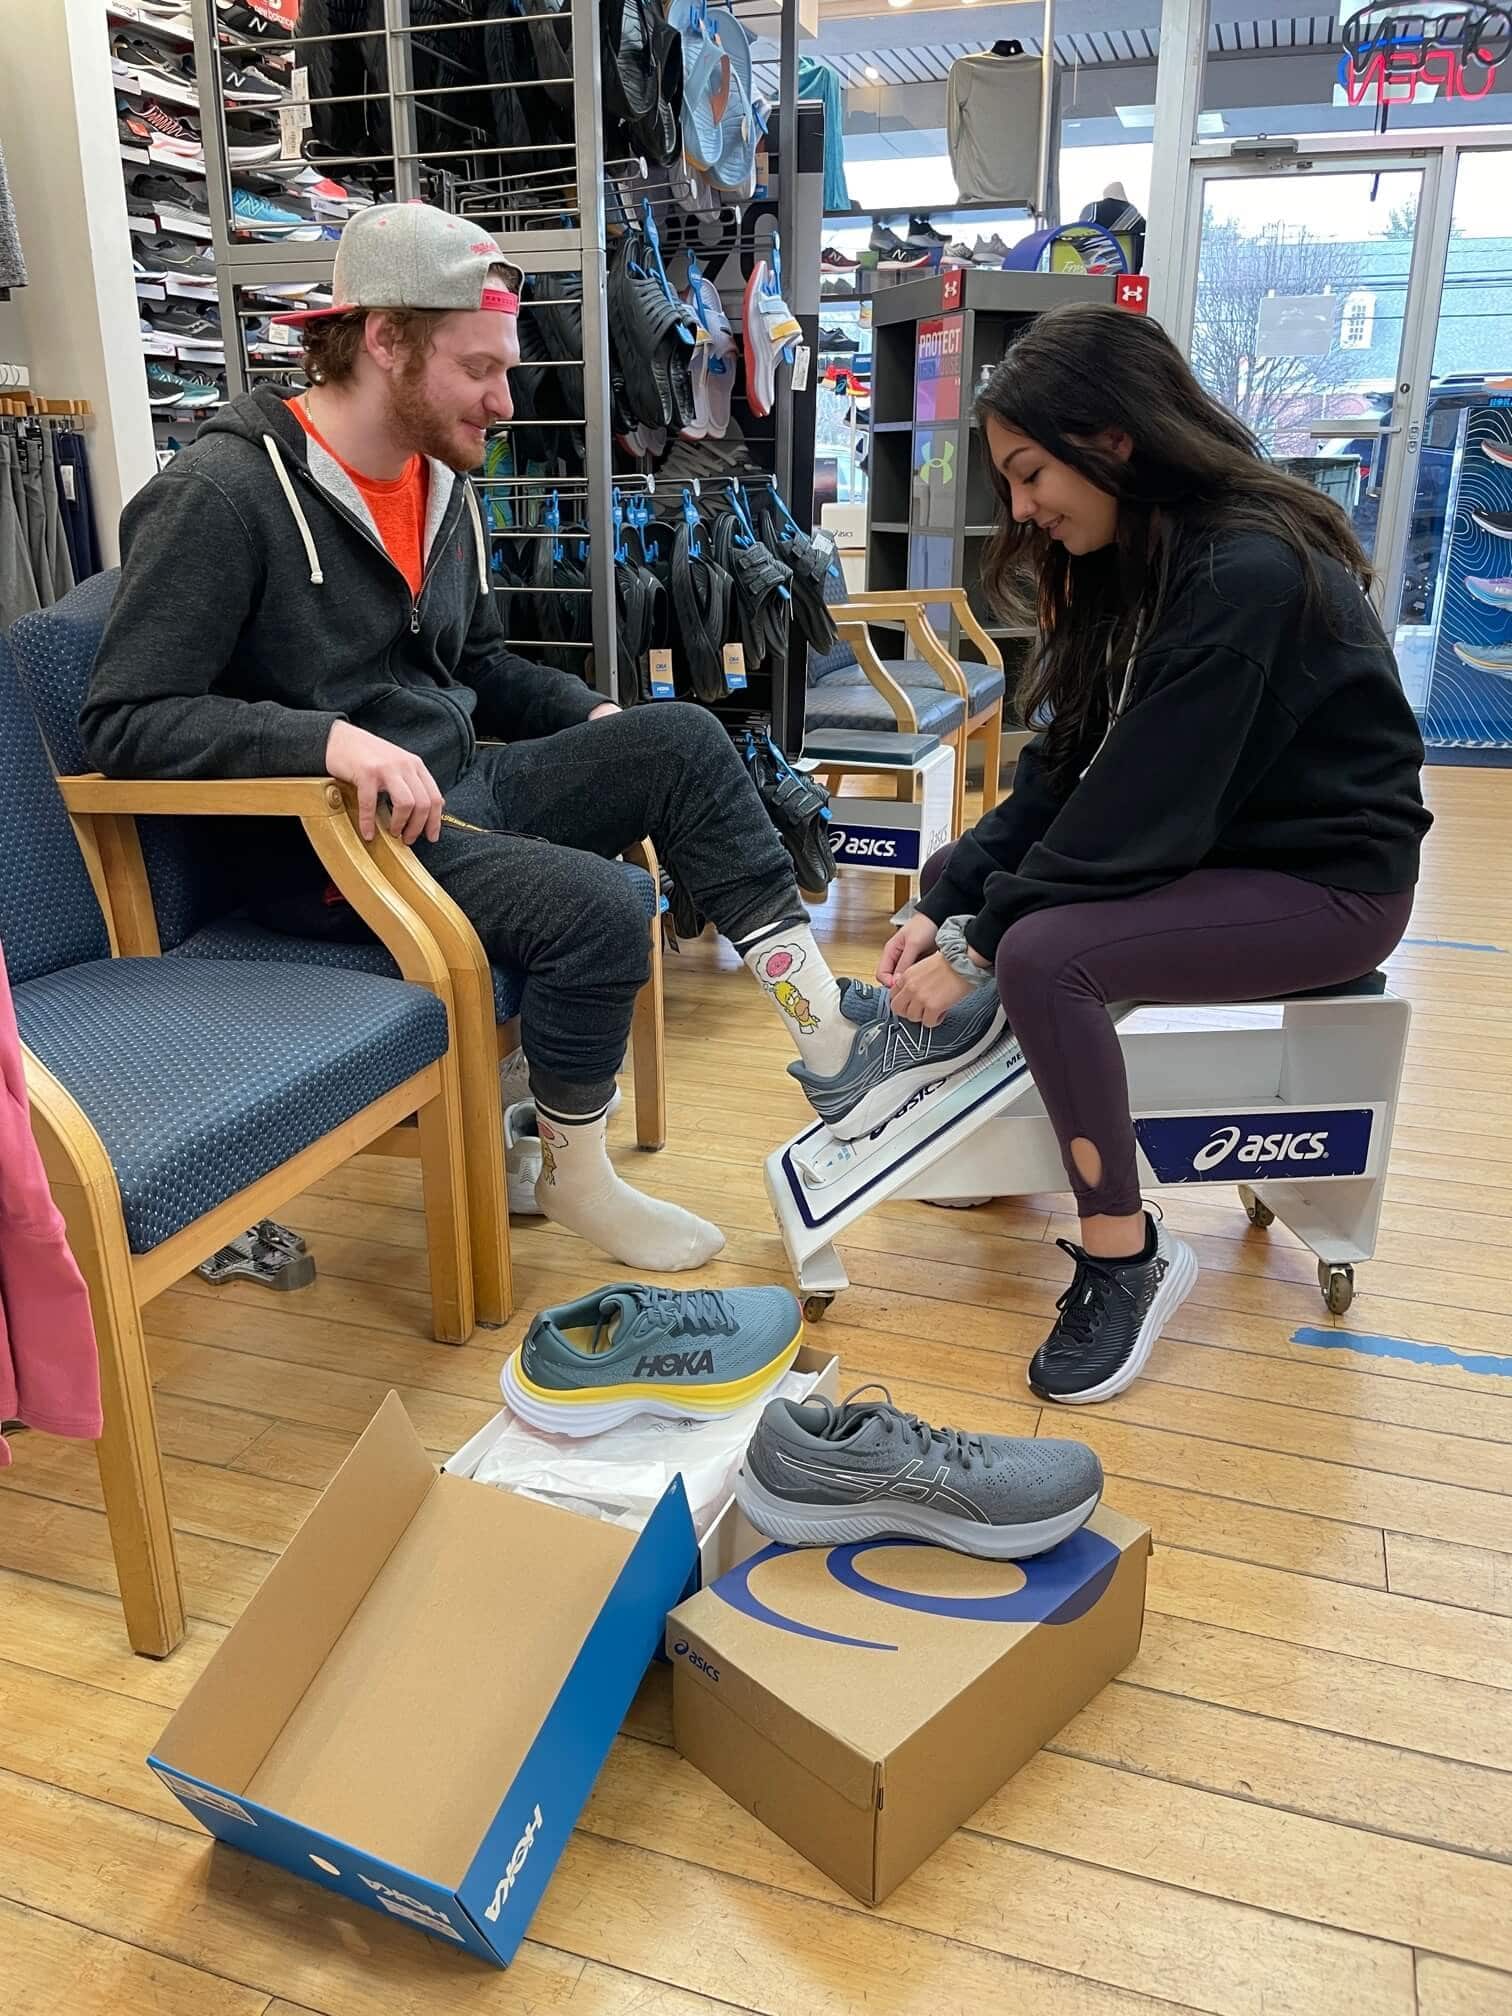 man being fitted with sneakers by woman